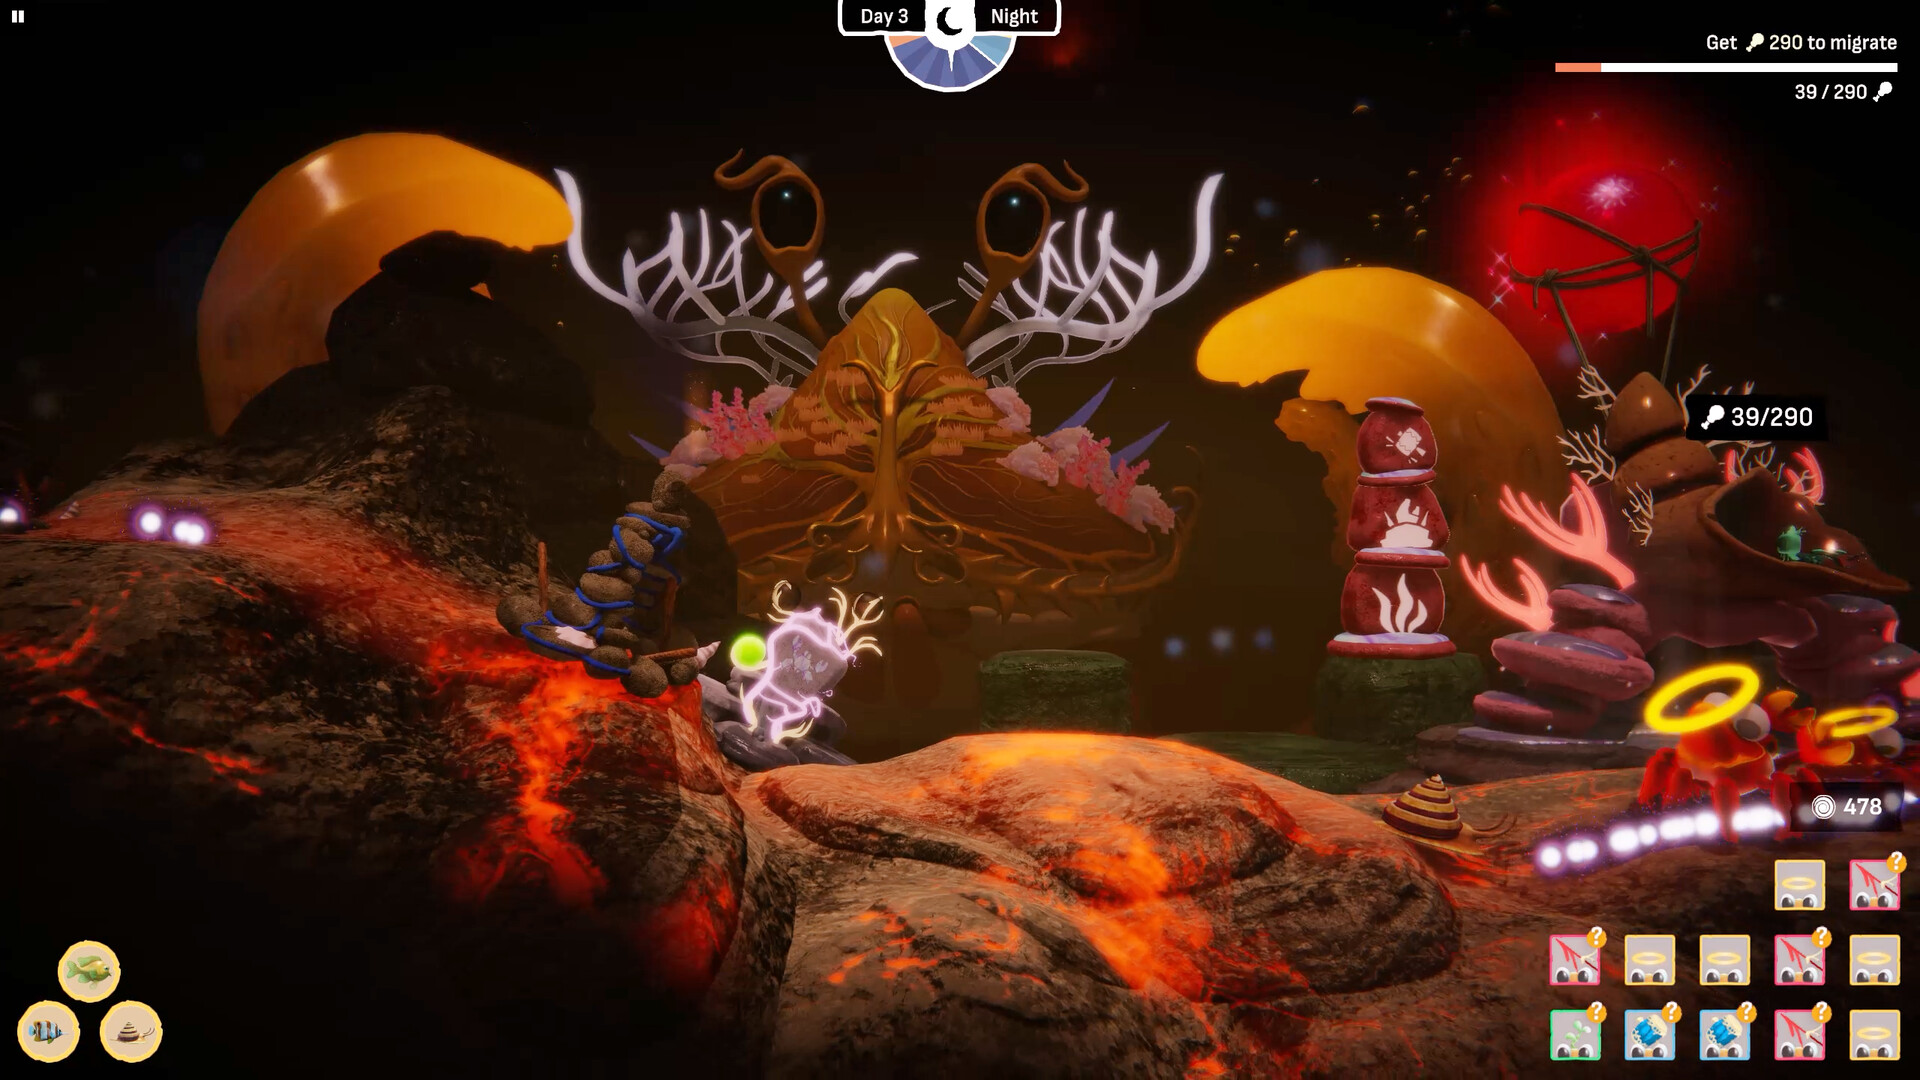 Crab God (PC) Game Review - Visual effects and environment details